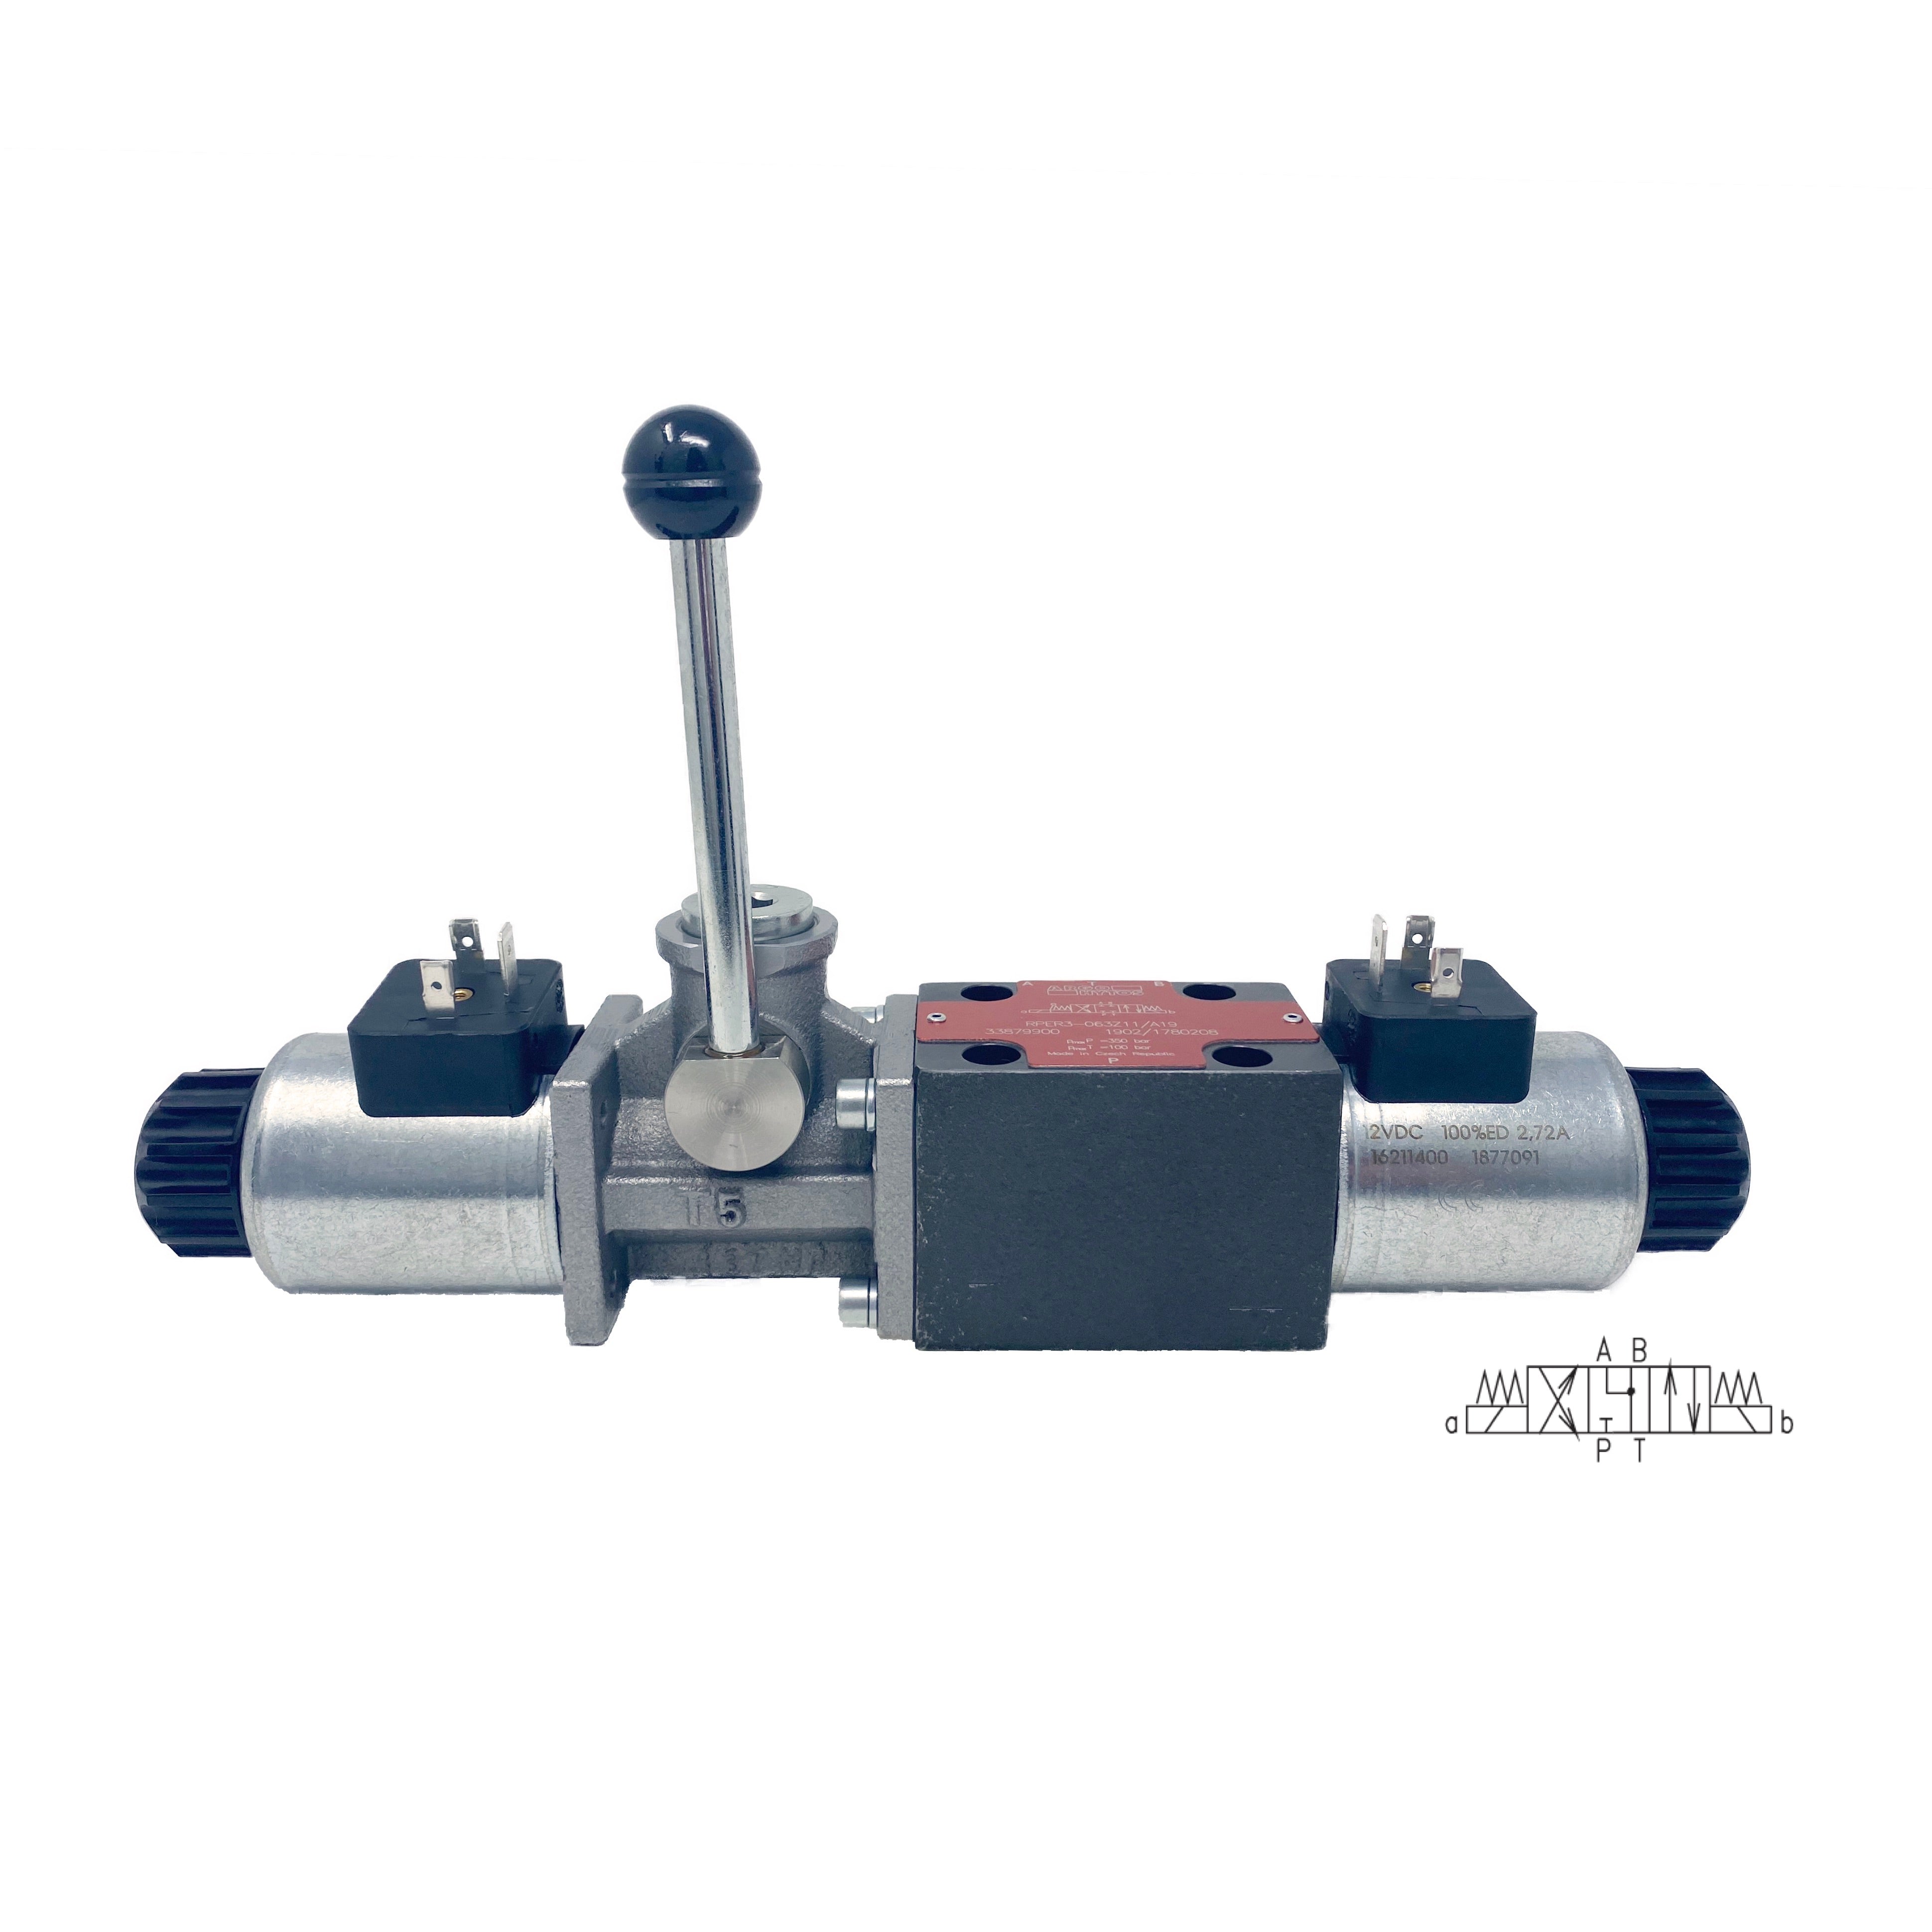 RPER3-063Y11/01200E1/A19 : Argo Directional Control Valve w/ Override Lever, D03, 21GPM, 5100psi, 3P4W, 12 VDC, DIN, Spring Centered, Motor Spool